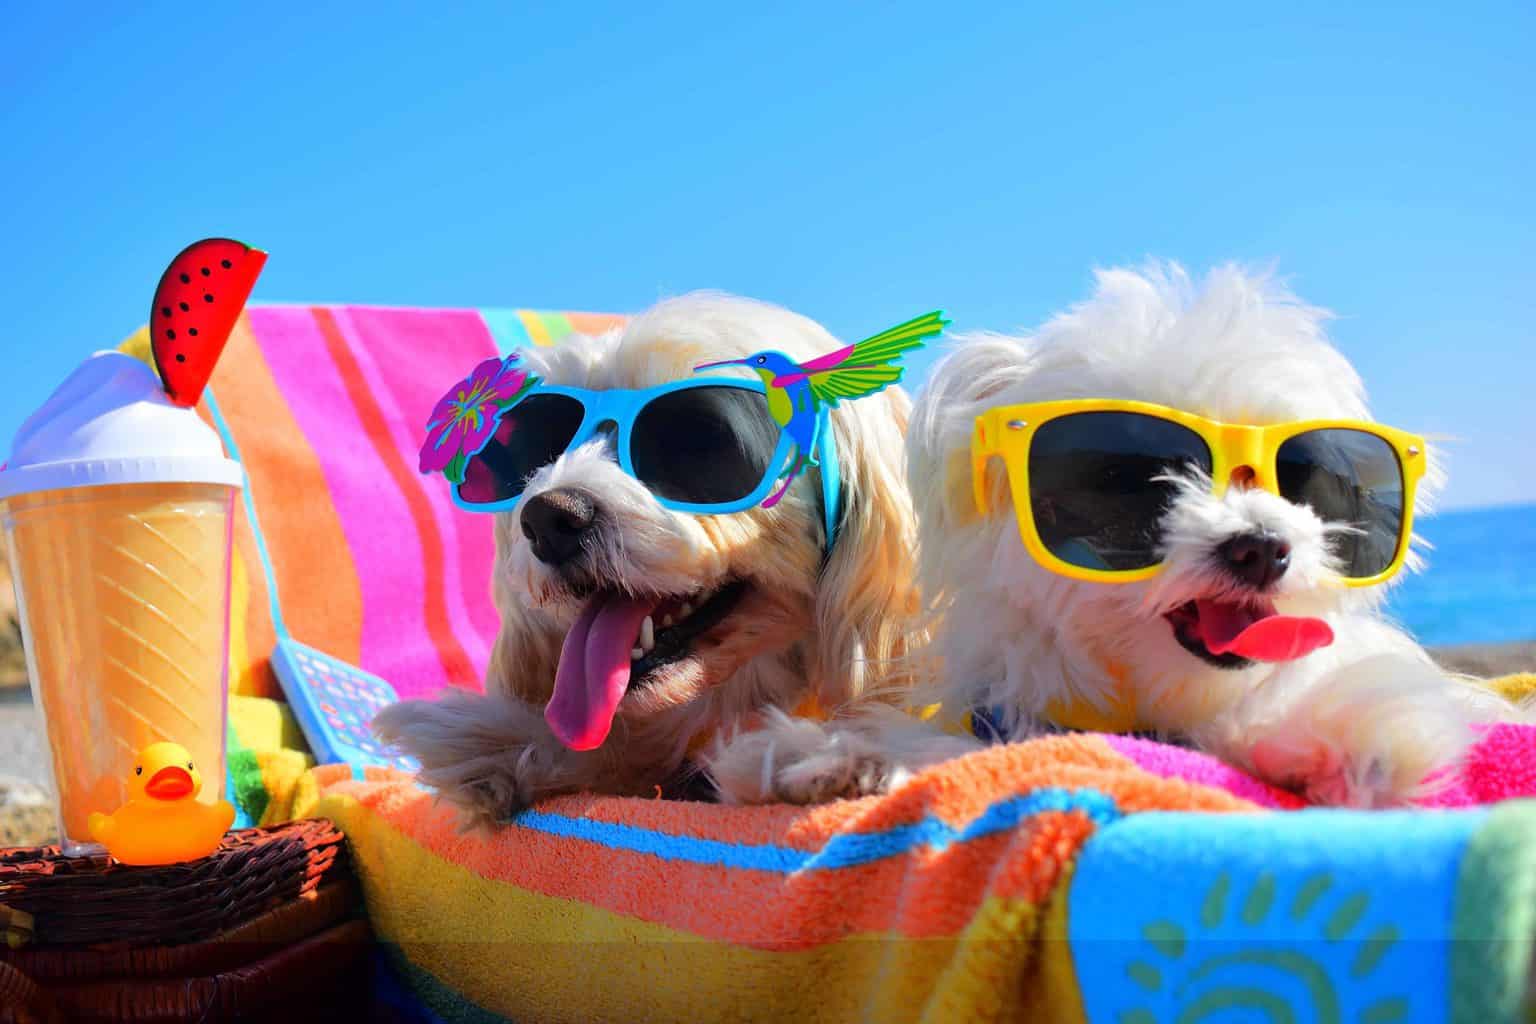 Dog-friendly accommodations photo illustration of two fluffy white dogs wearing sunglasses while sitting on a beach towel.